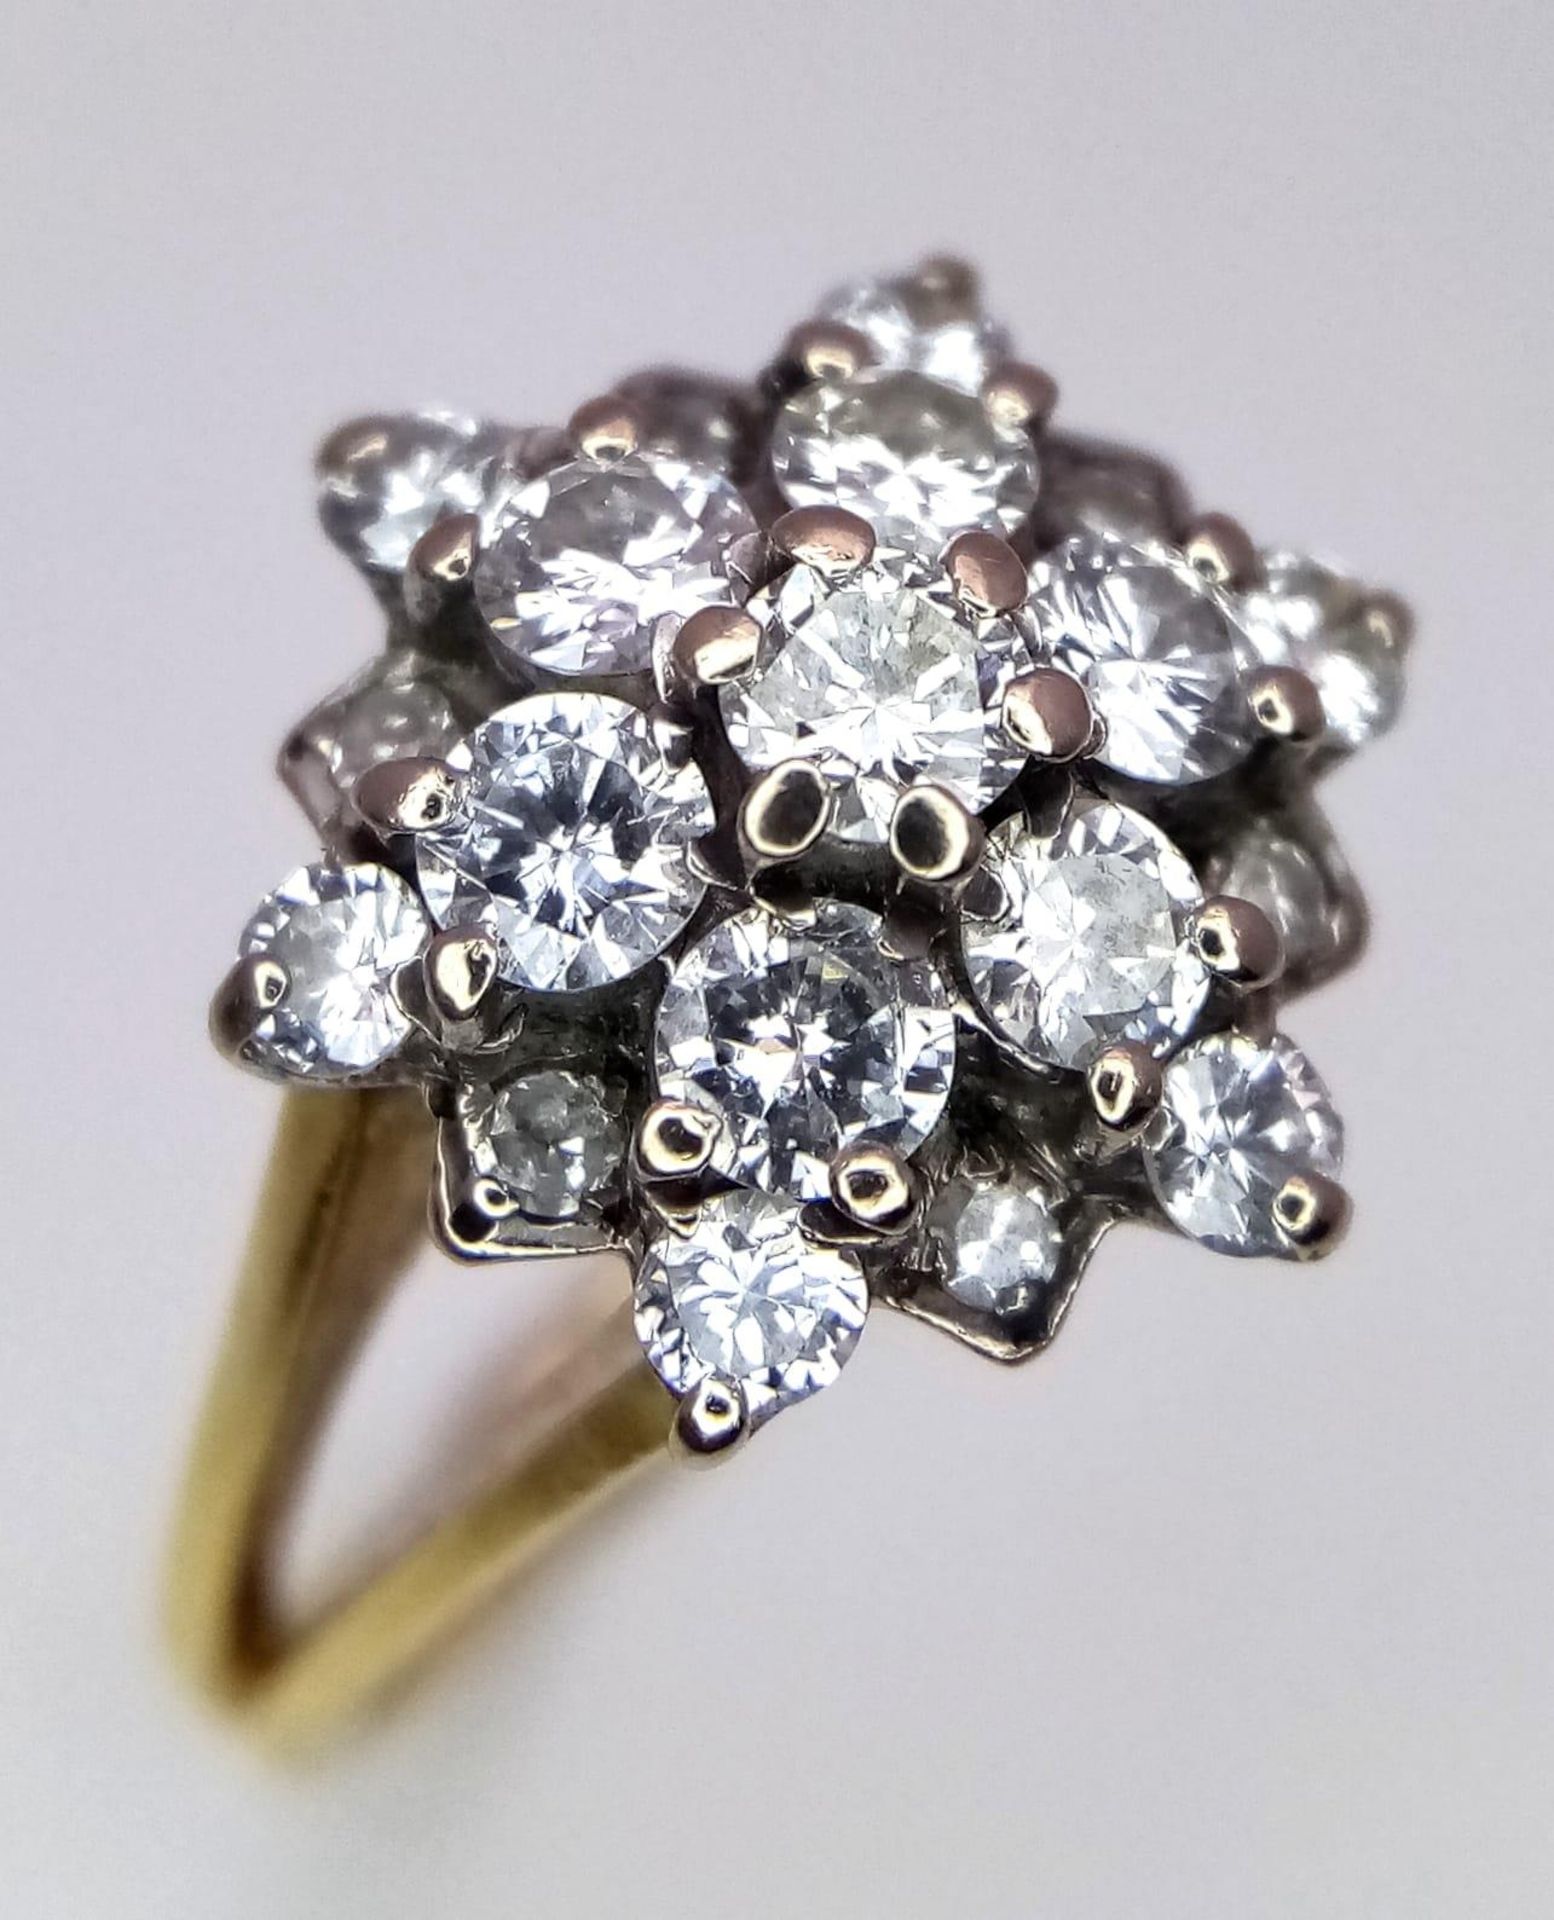 AN 18K YELLOW GOLD DIAMOND CLUSTER RING - 1CT. 3.7G. SIZE H